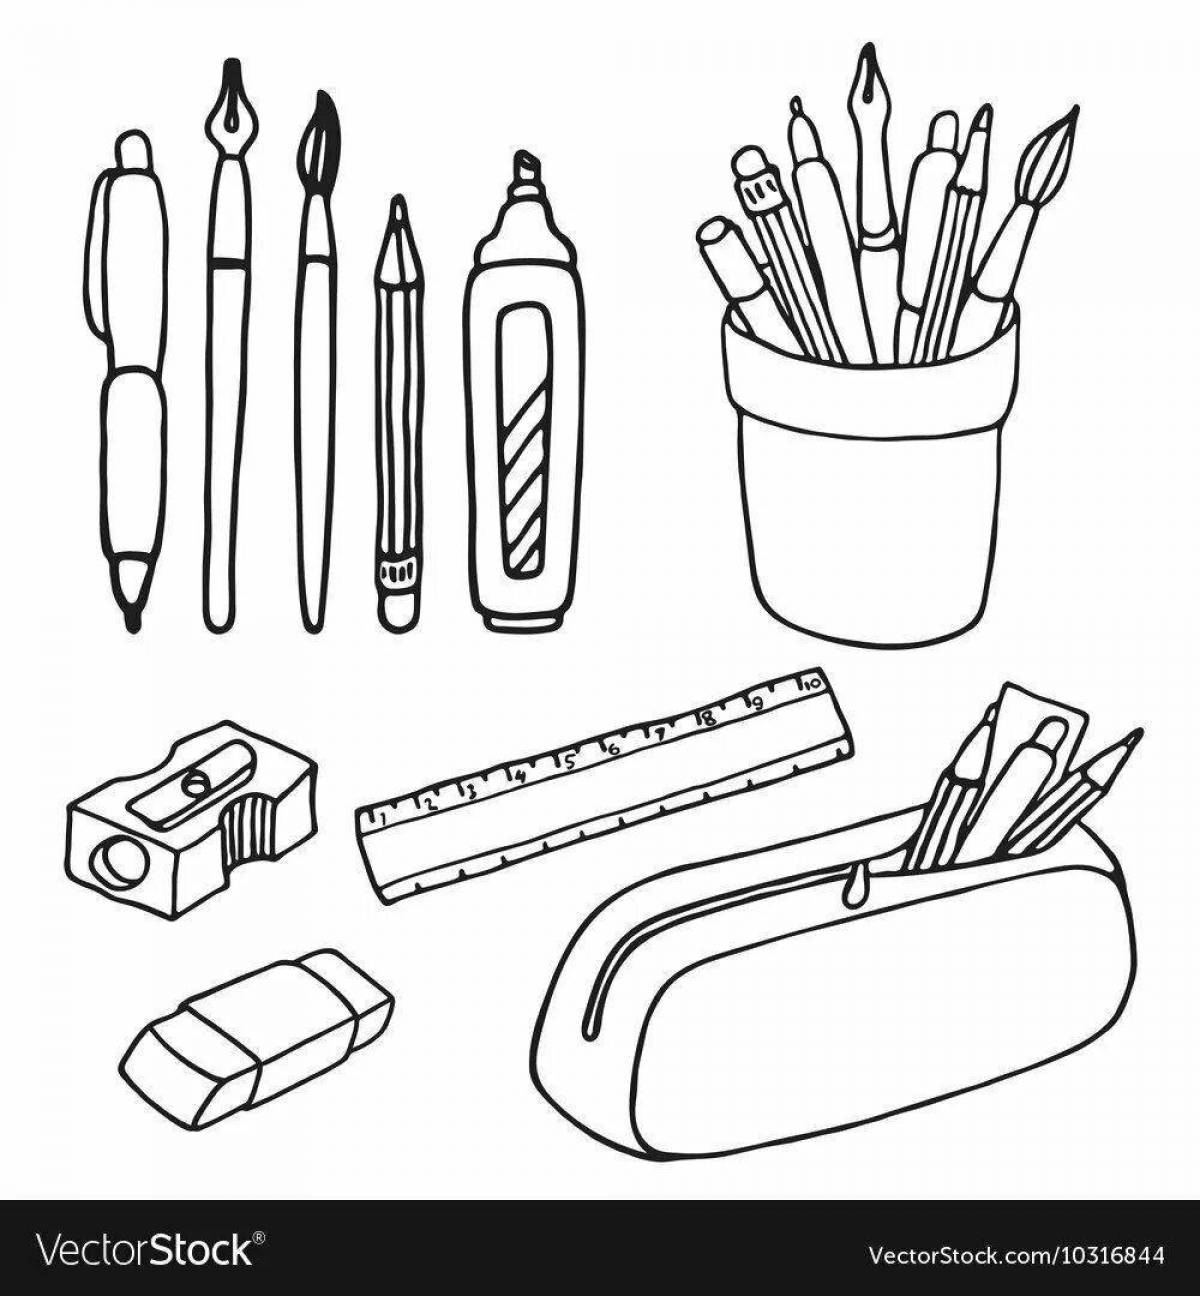 Energetic coloring study materials